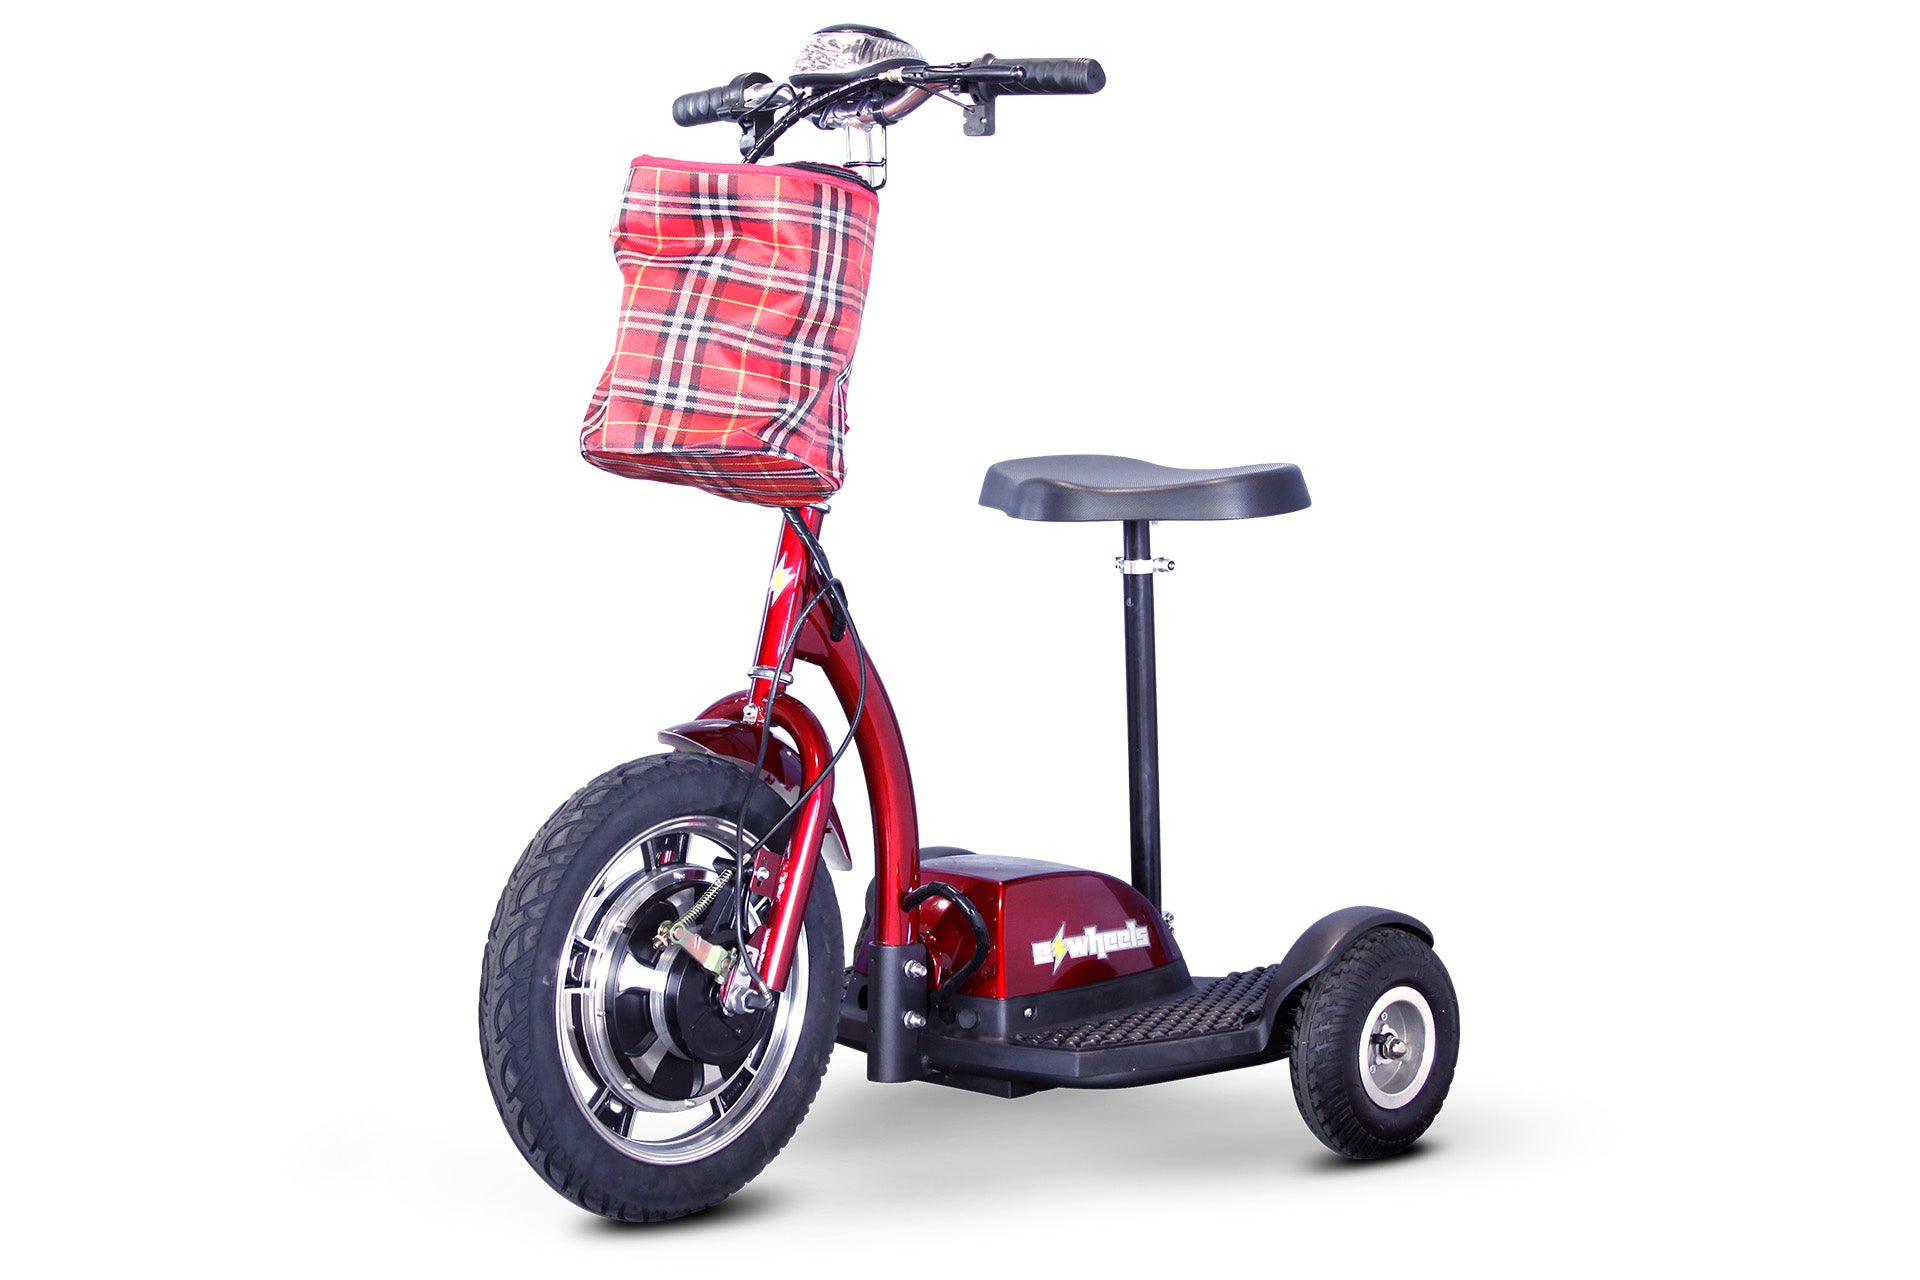 eWheels - 3 Wheels Recreational Mobility Scooter - 300lbs Weight Capacity - EW-18 UNASSEMBLED